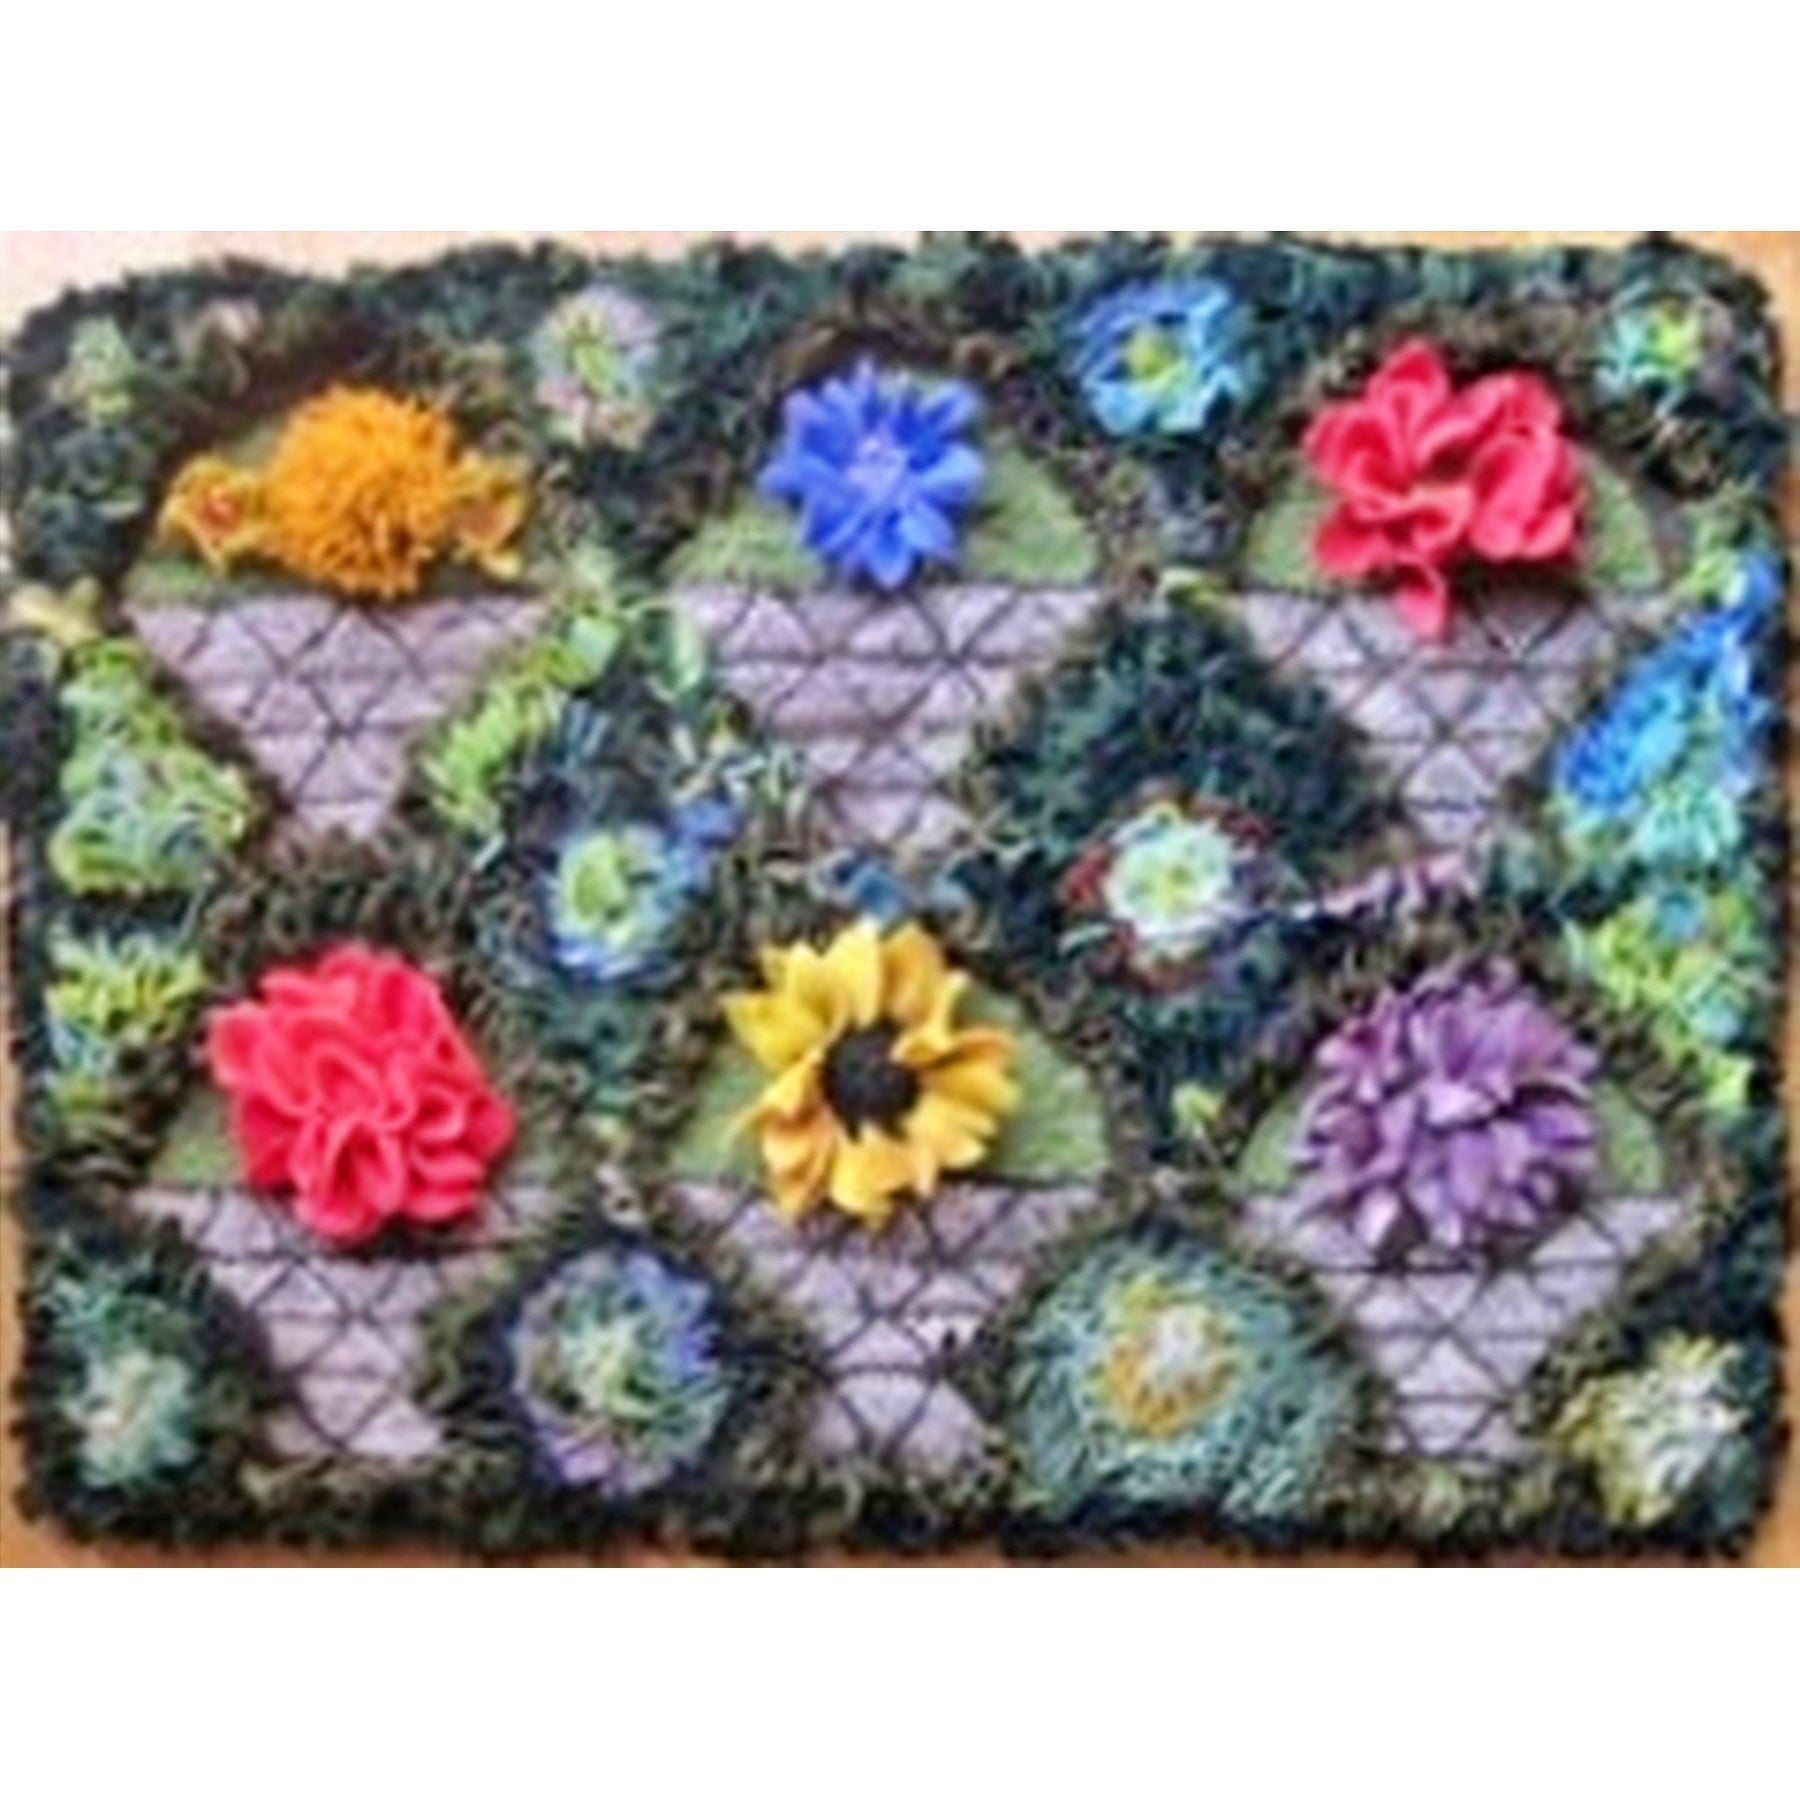 Basket Quilt Squares, rug hooked by Cheryl Roberts